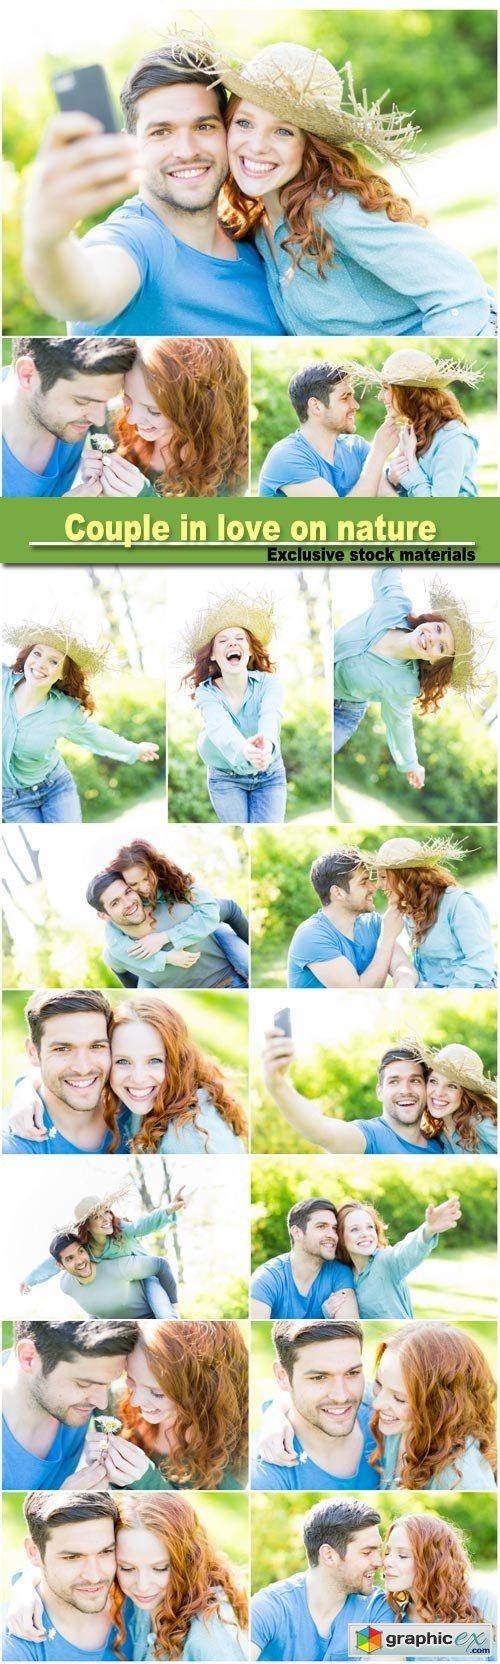 Couple in love on nature